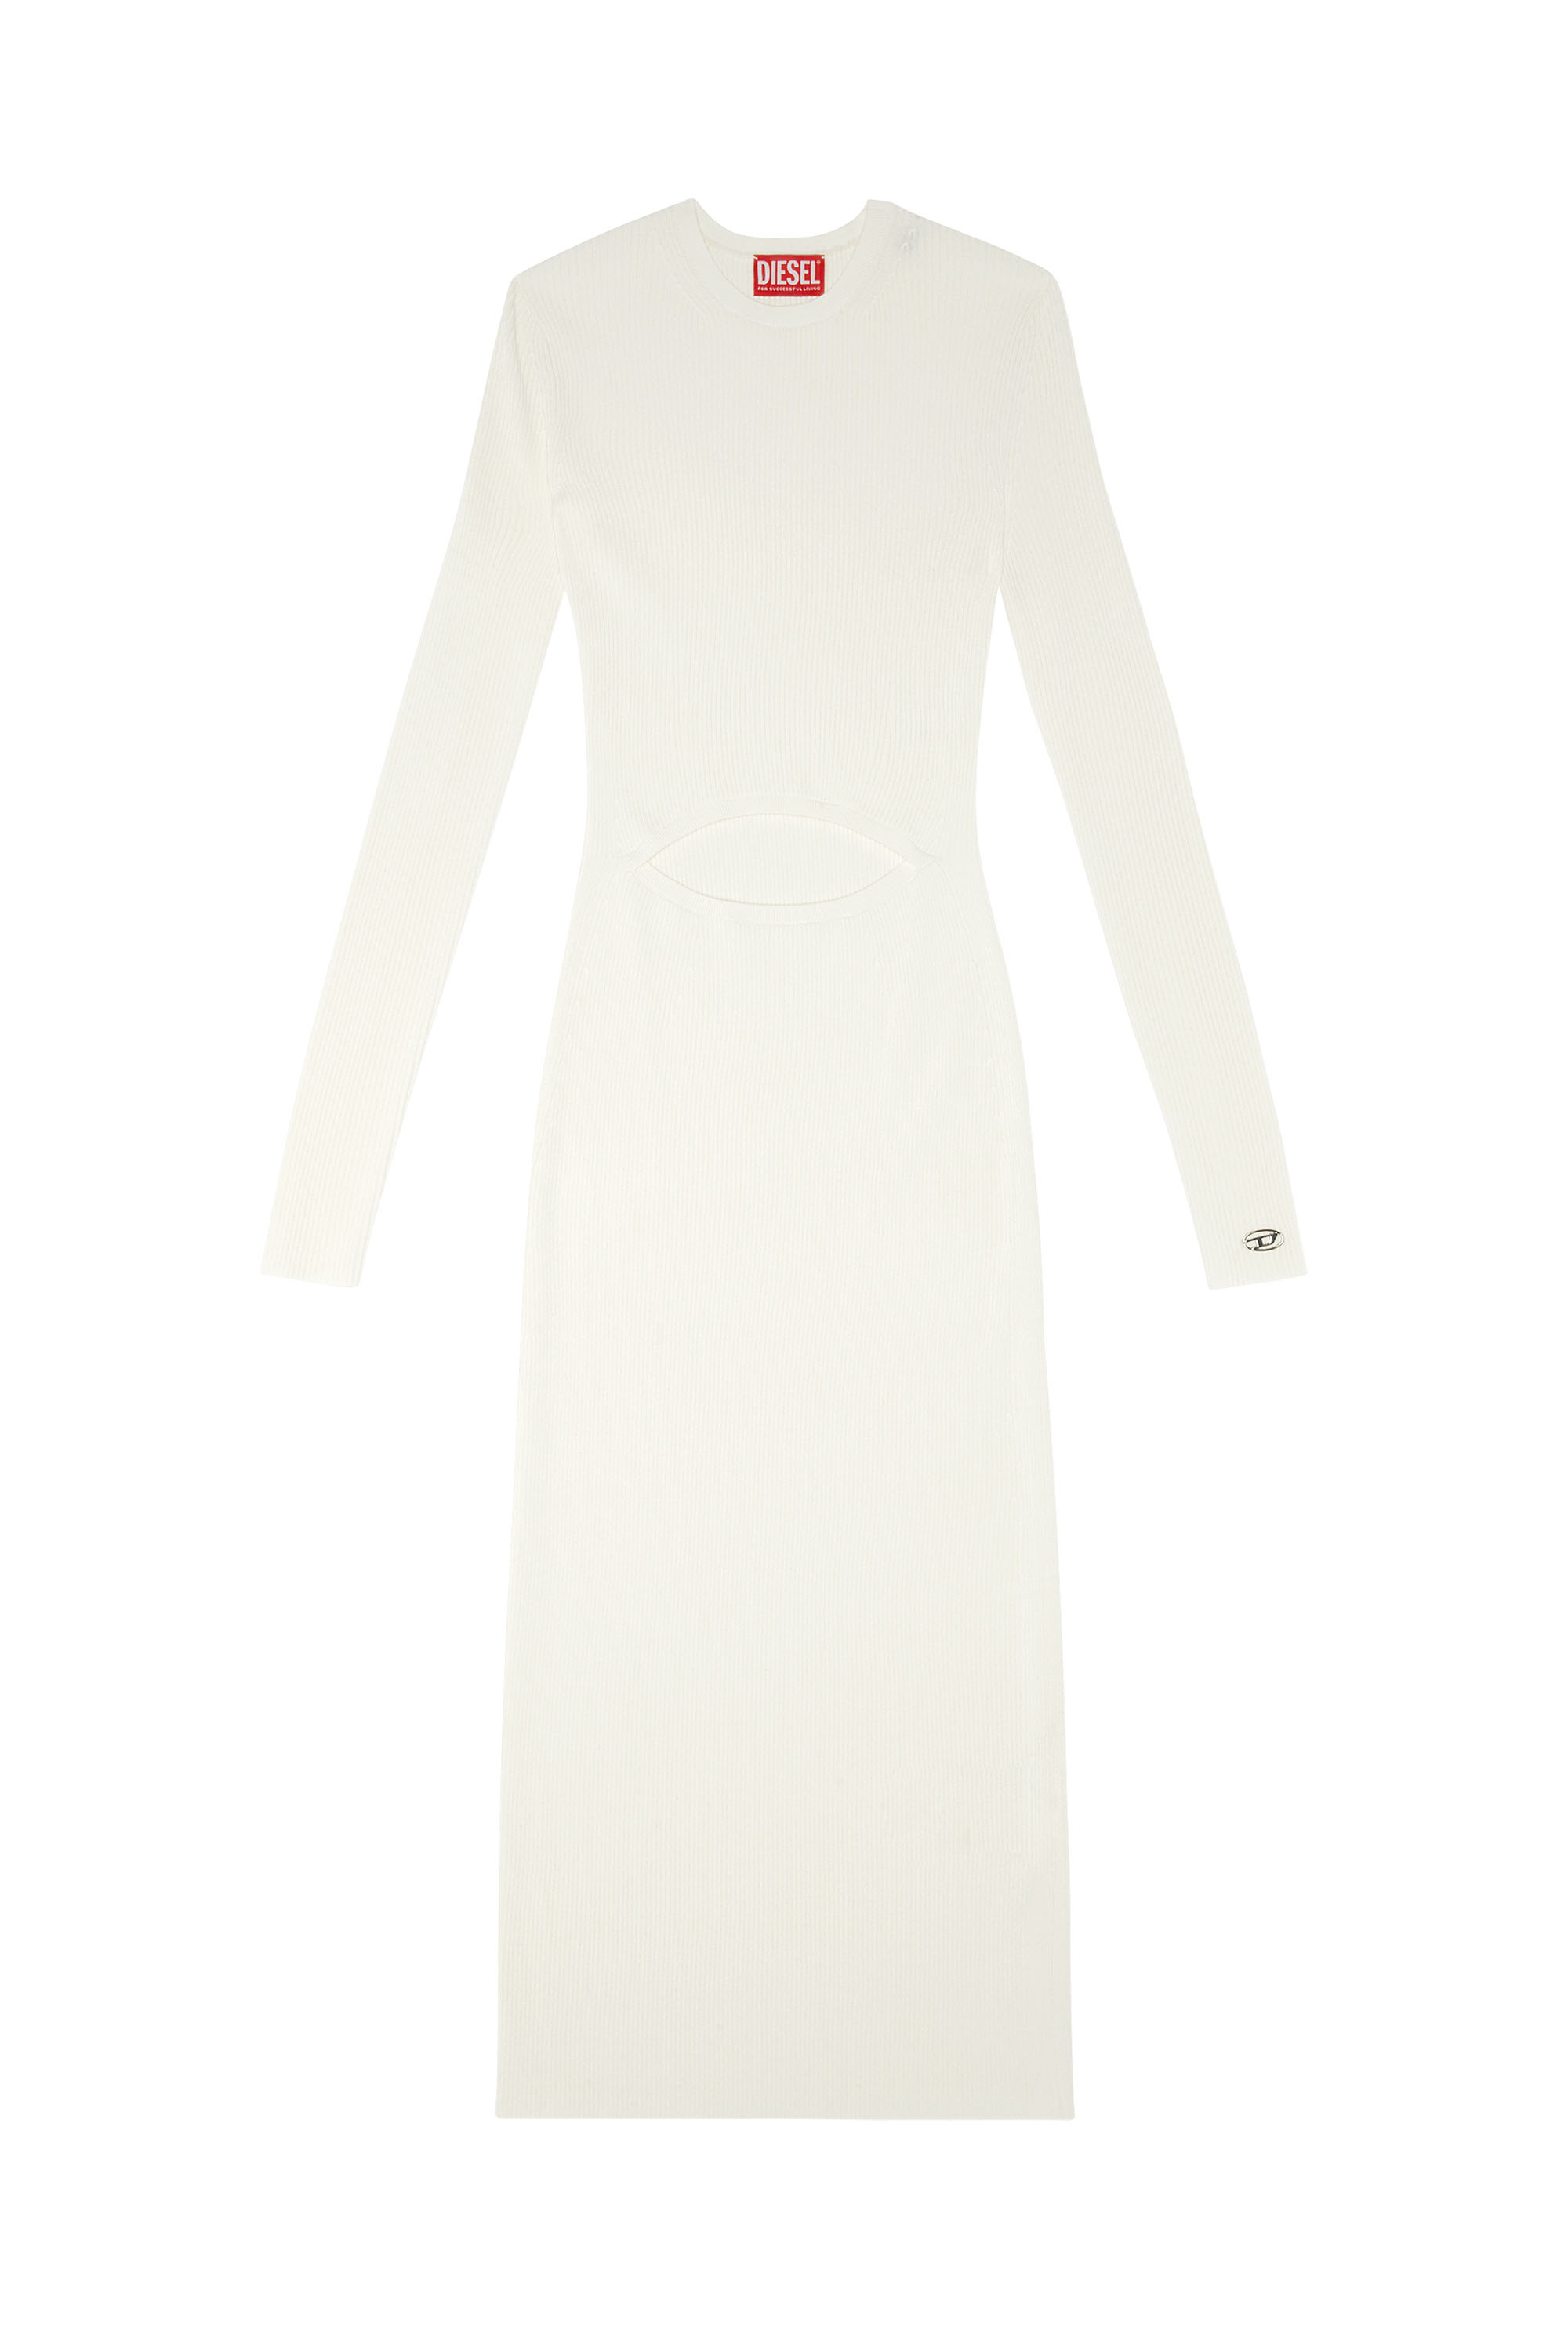 Shop Diesel Wool-blend Dress With Cut-out In White